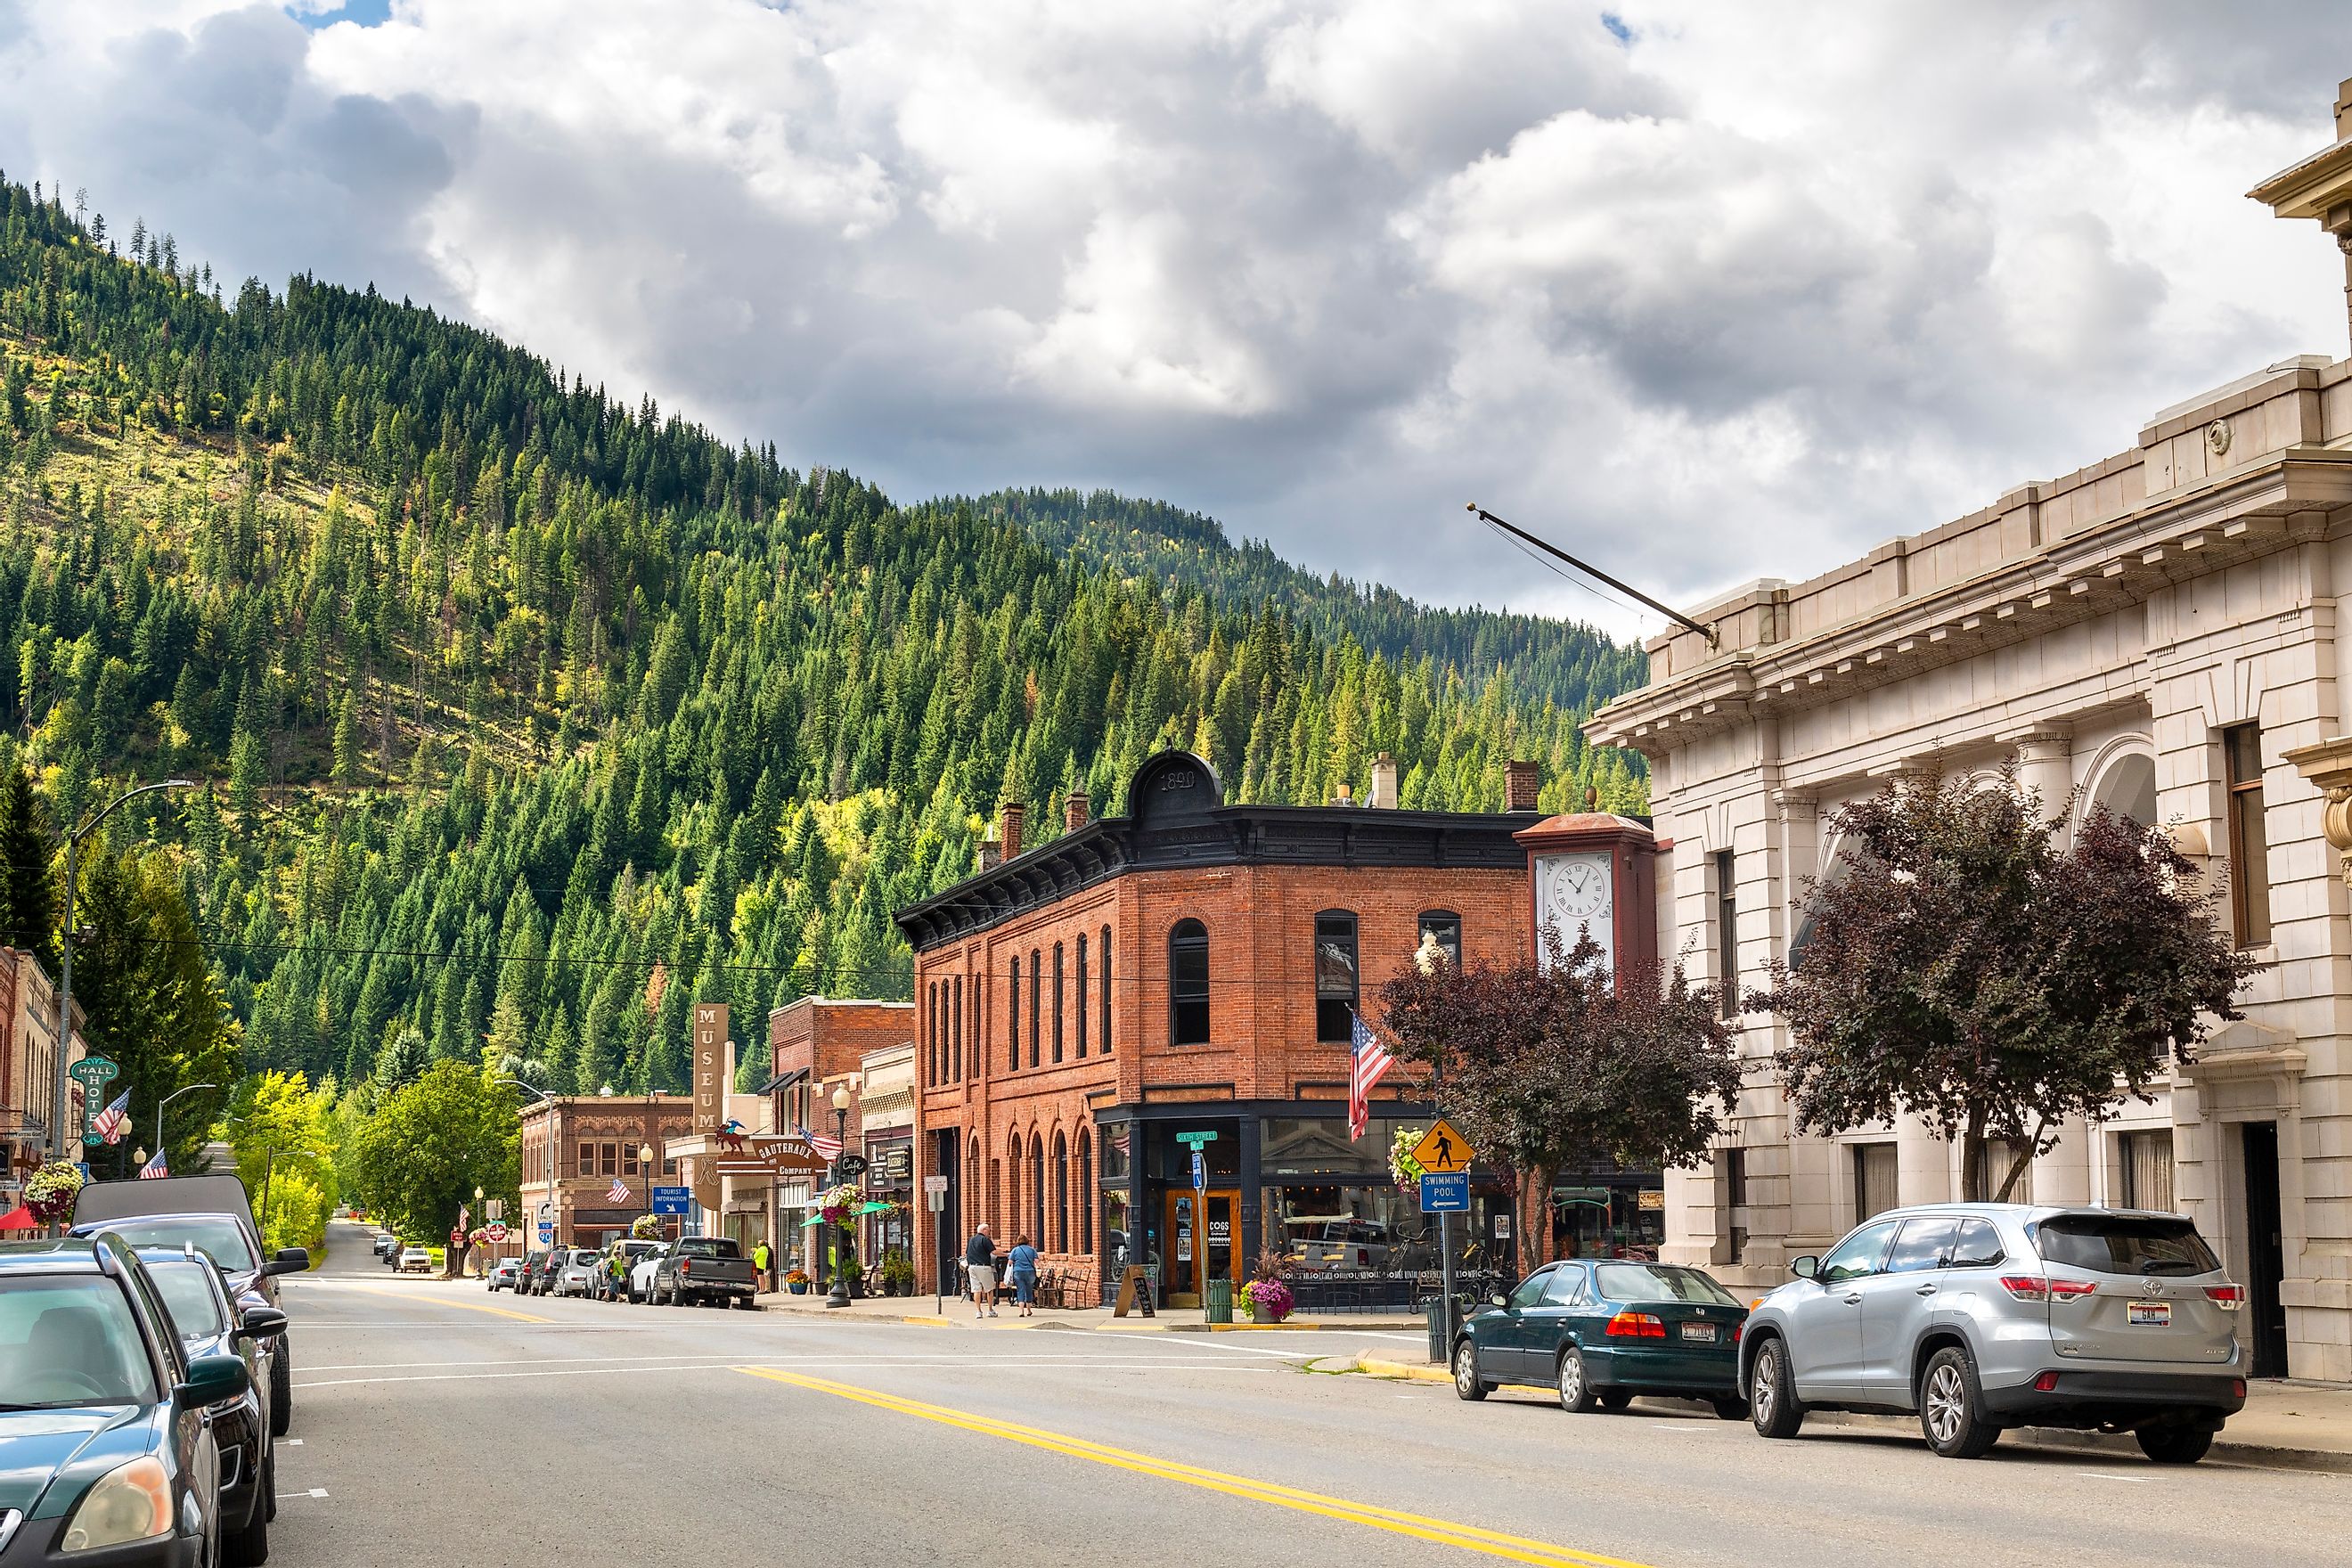 The historic main street of the Old West mining town of Wallace, Idaho, in the Silver Valley area of the Inland Northwest of the U.S.